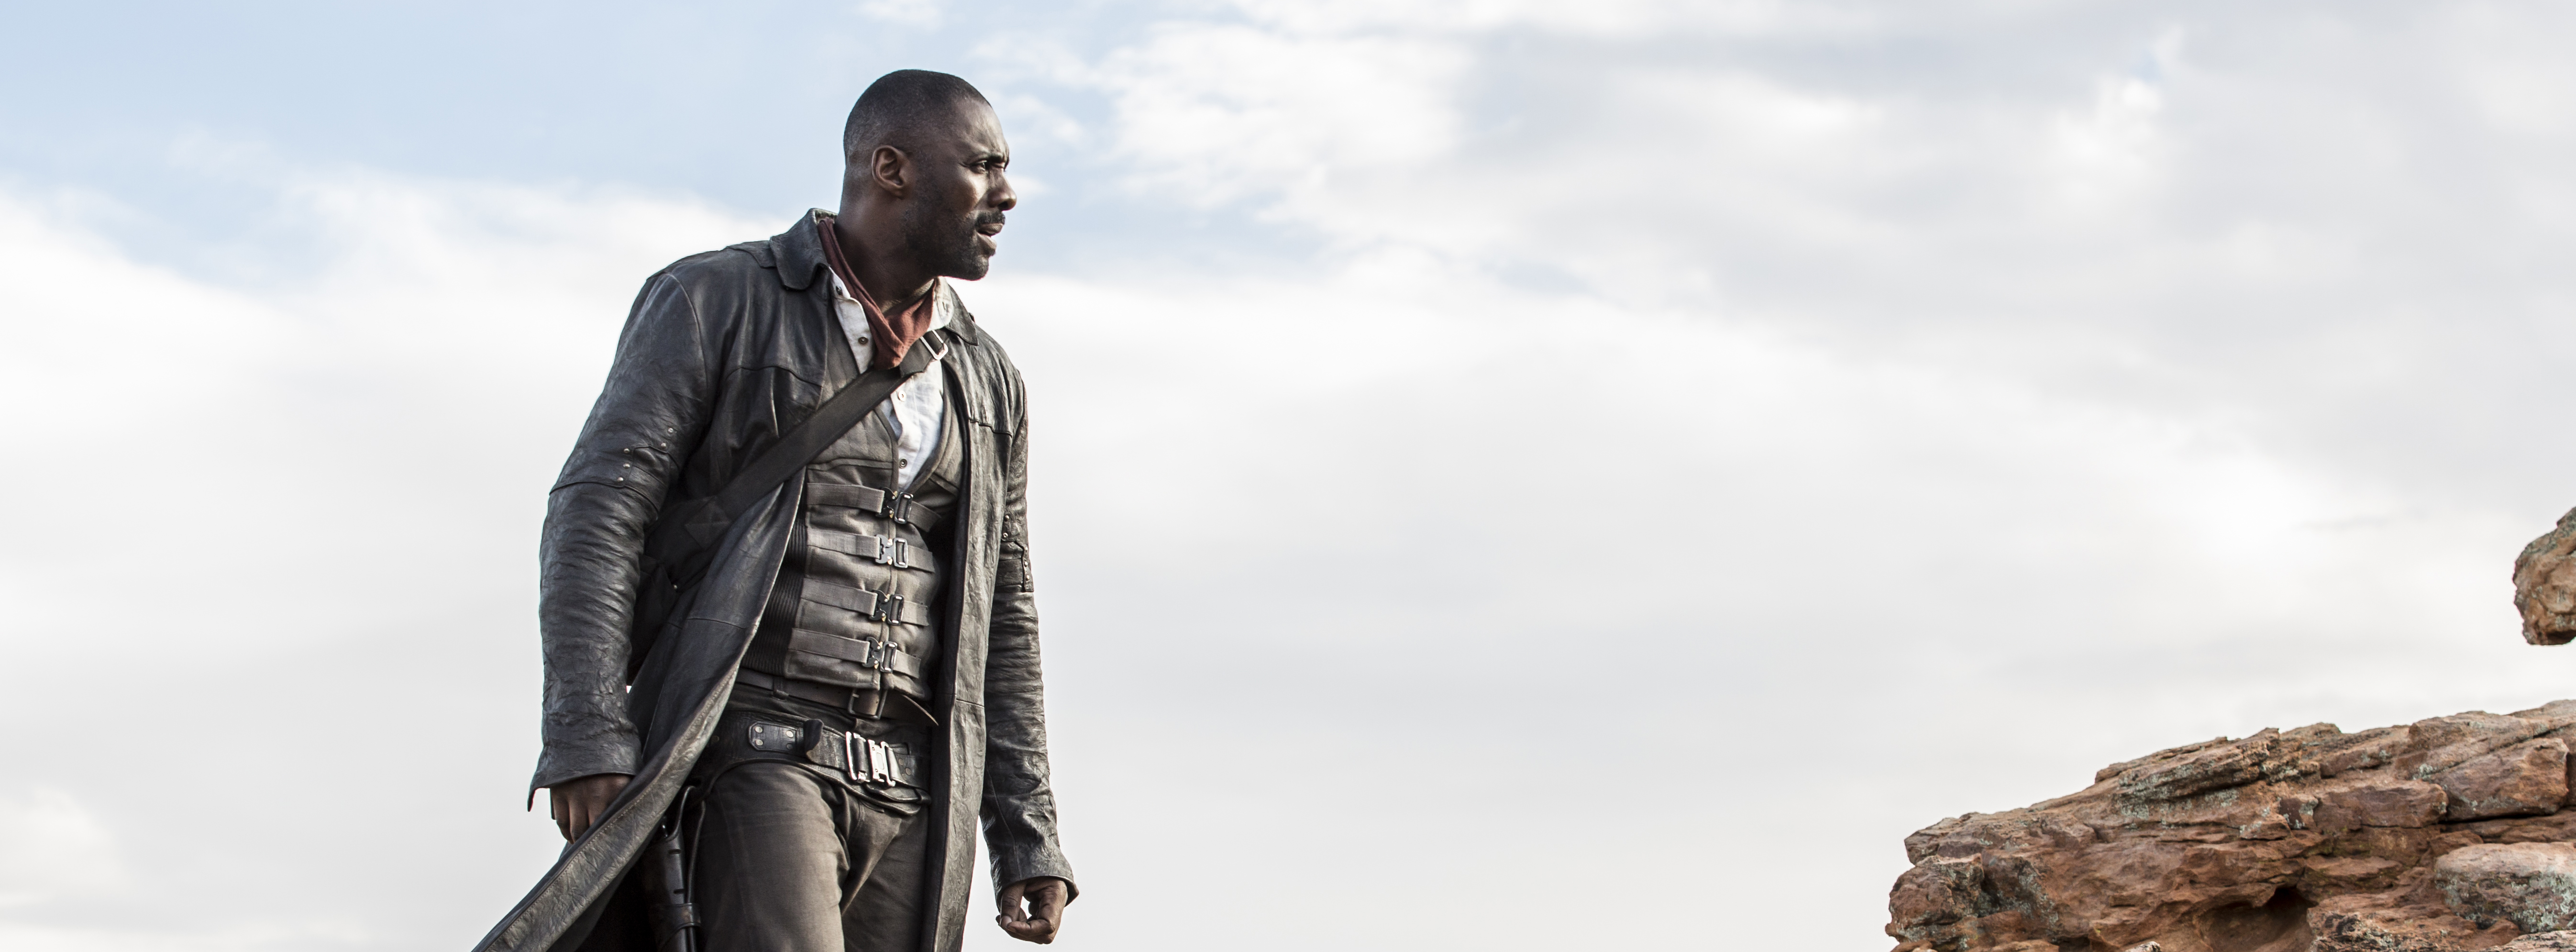 ‘The Dark Tower’ Trailer Might Finally be Released This Week